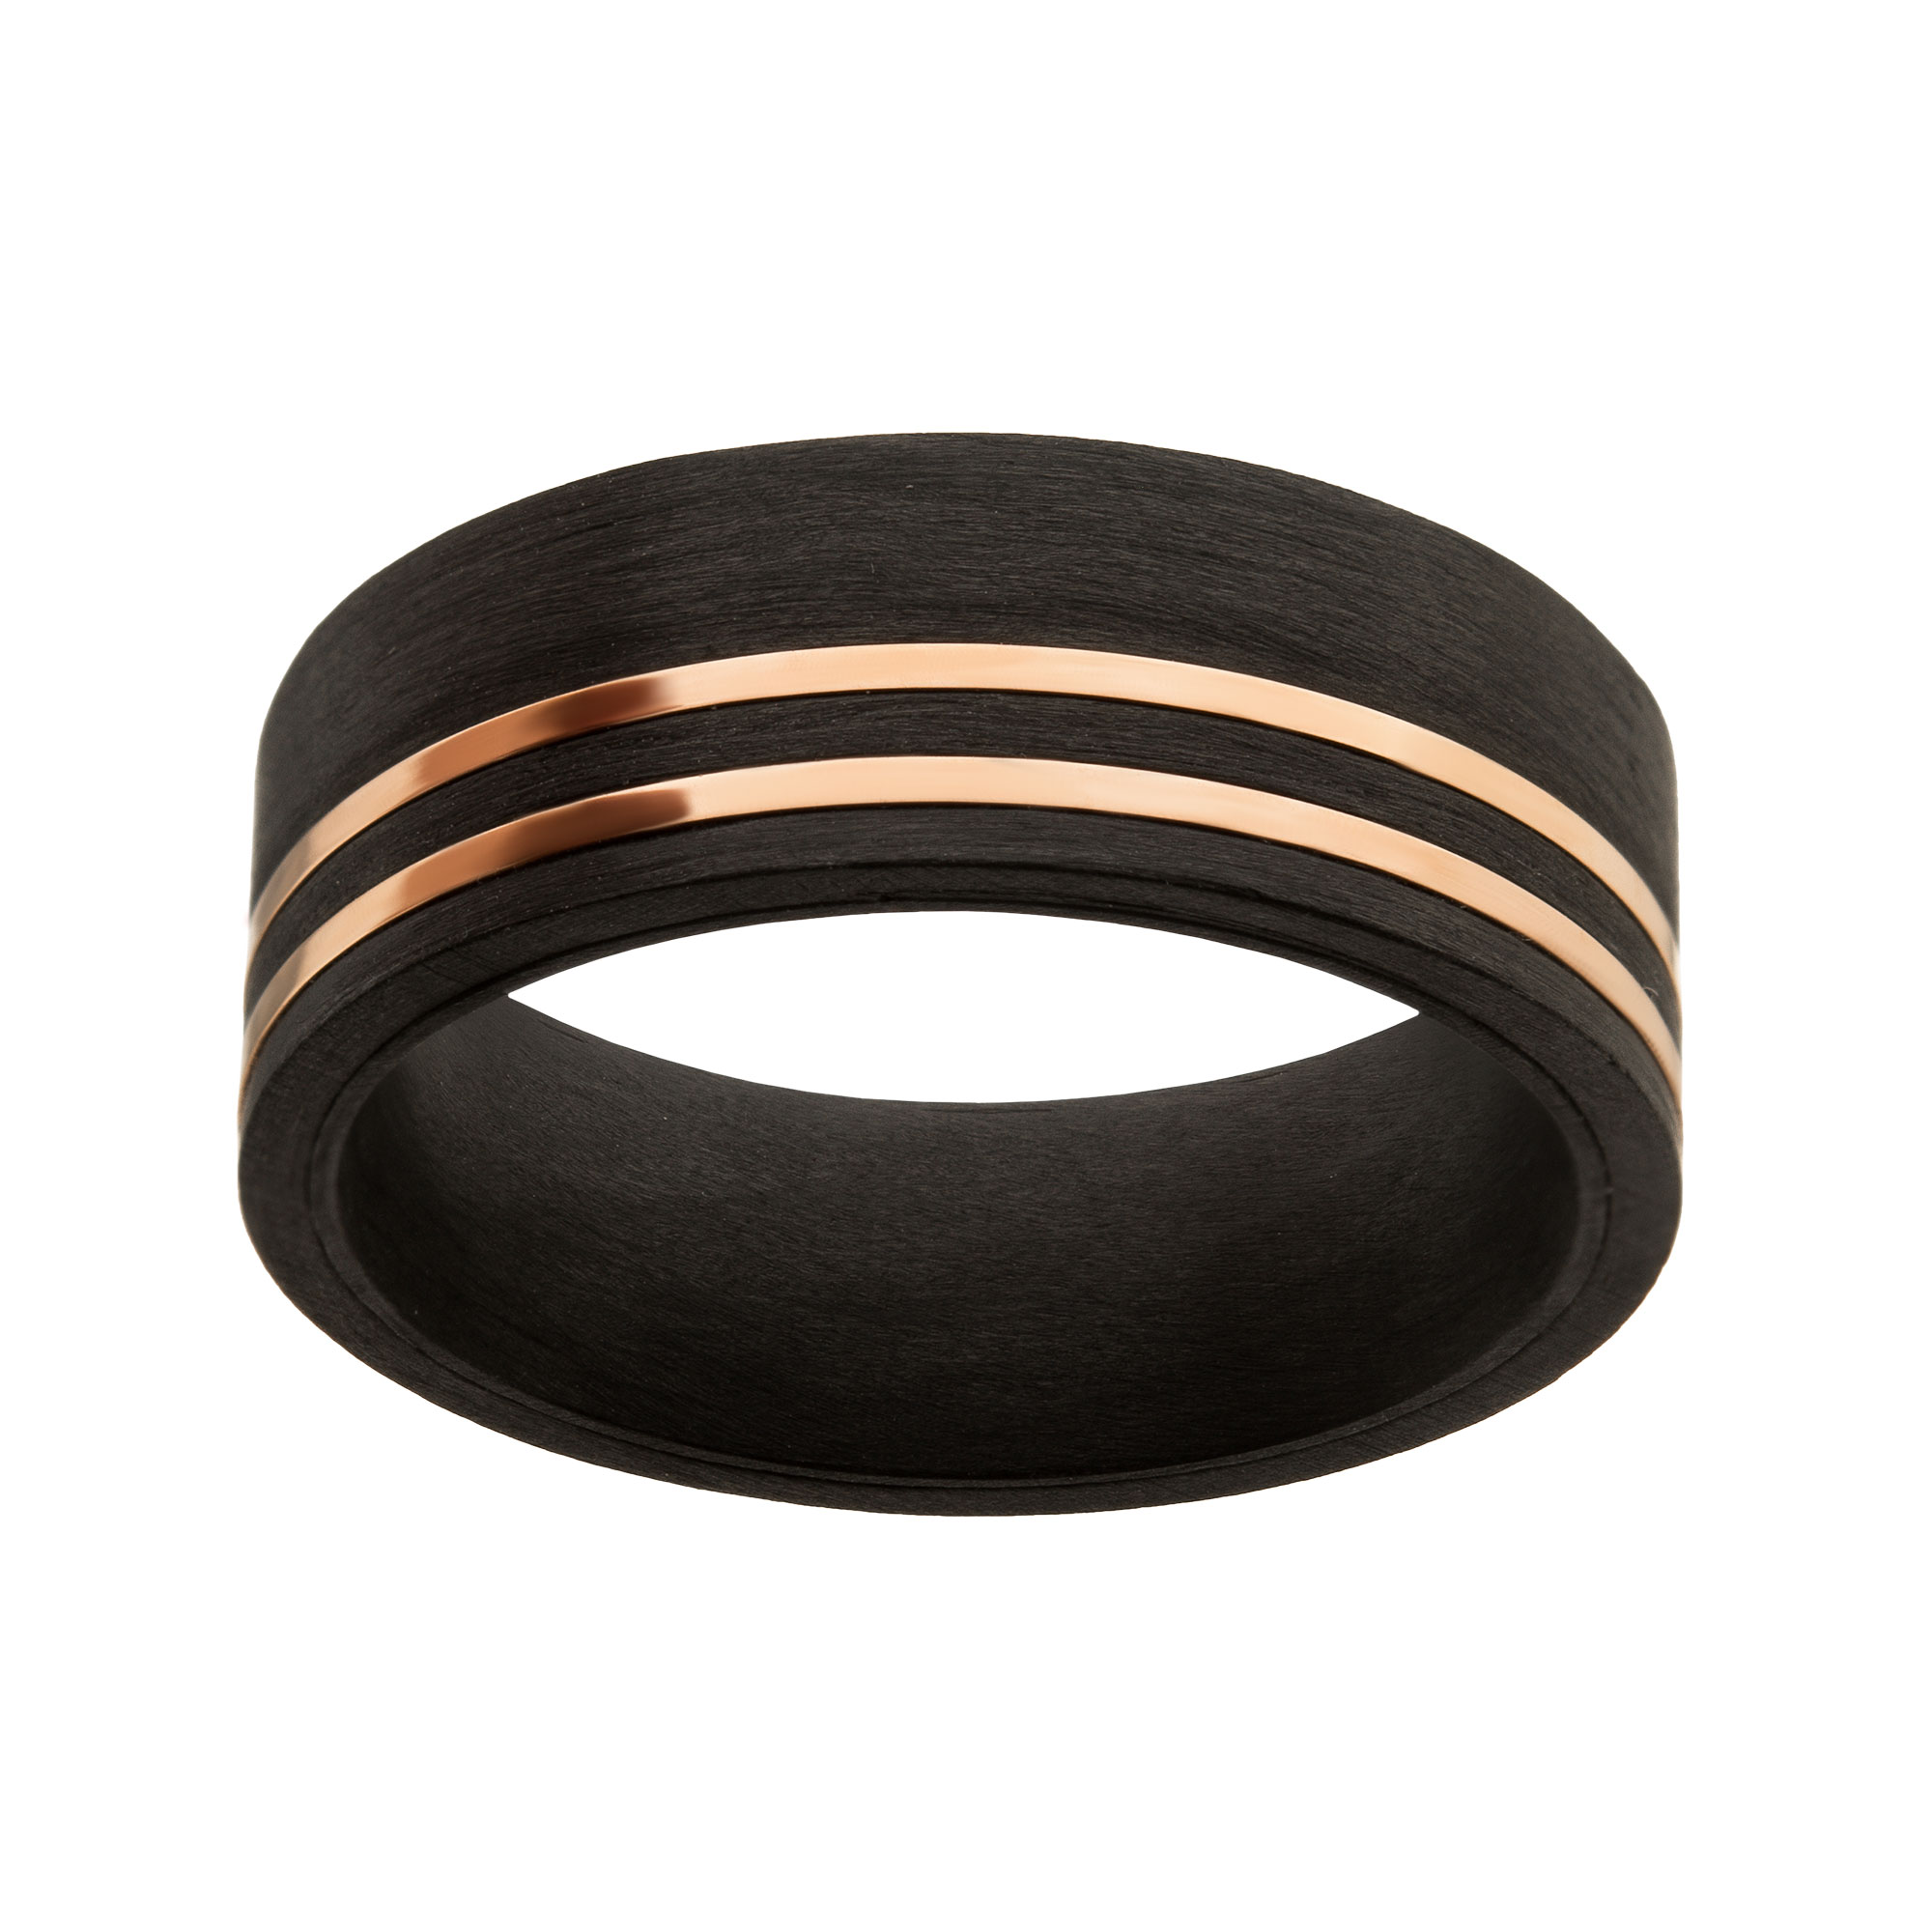 Solid Carbon with Inlayed Rose Gold Thin Lines Comfort Fit Ring Image 2 Lewis Jewelers, Inc. Ansonia, CT